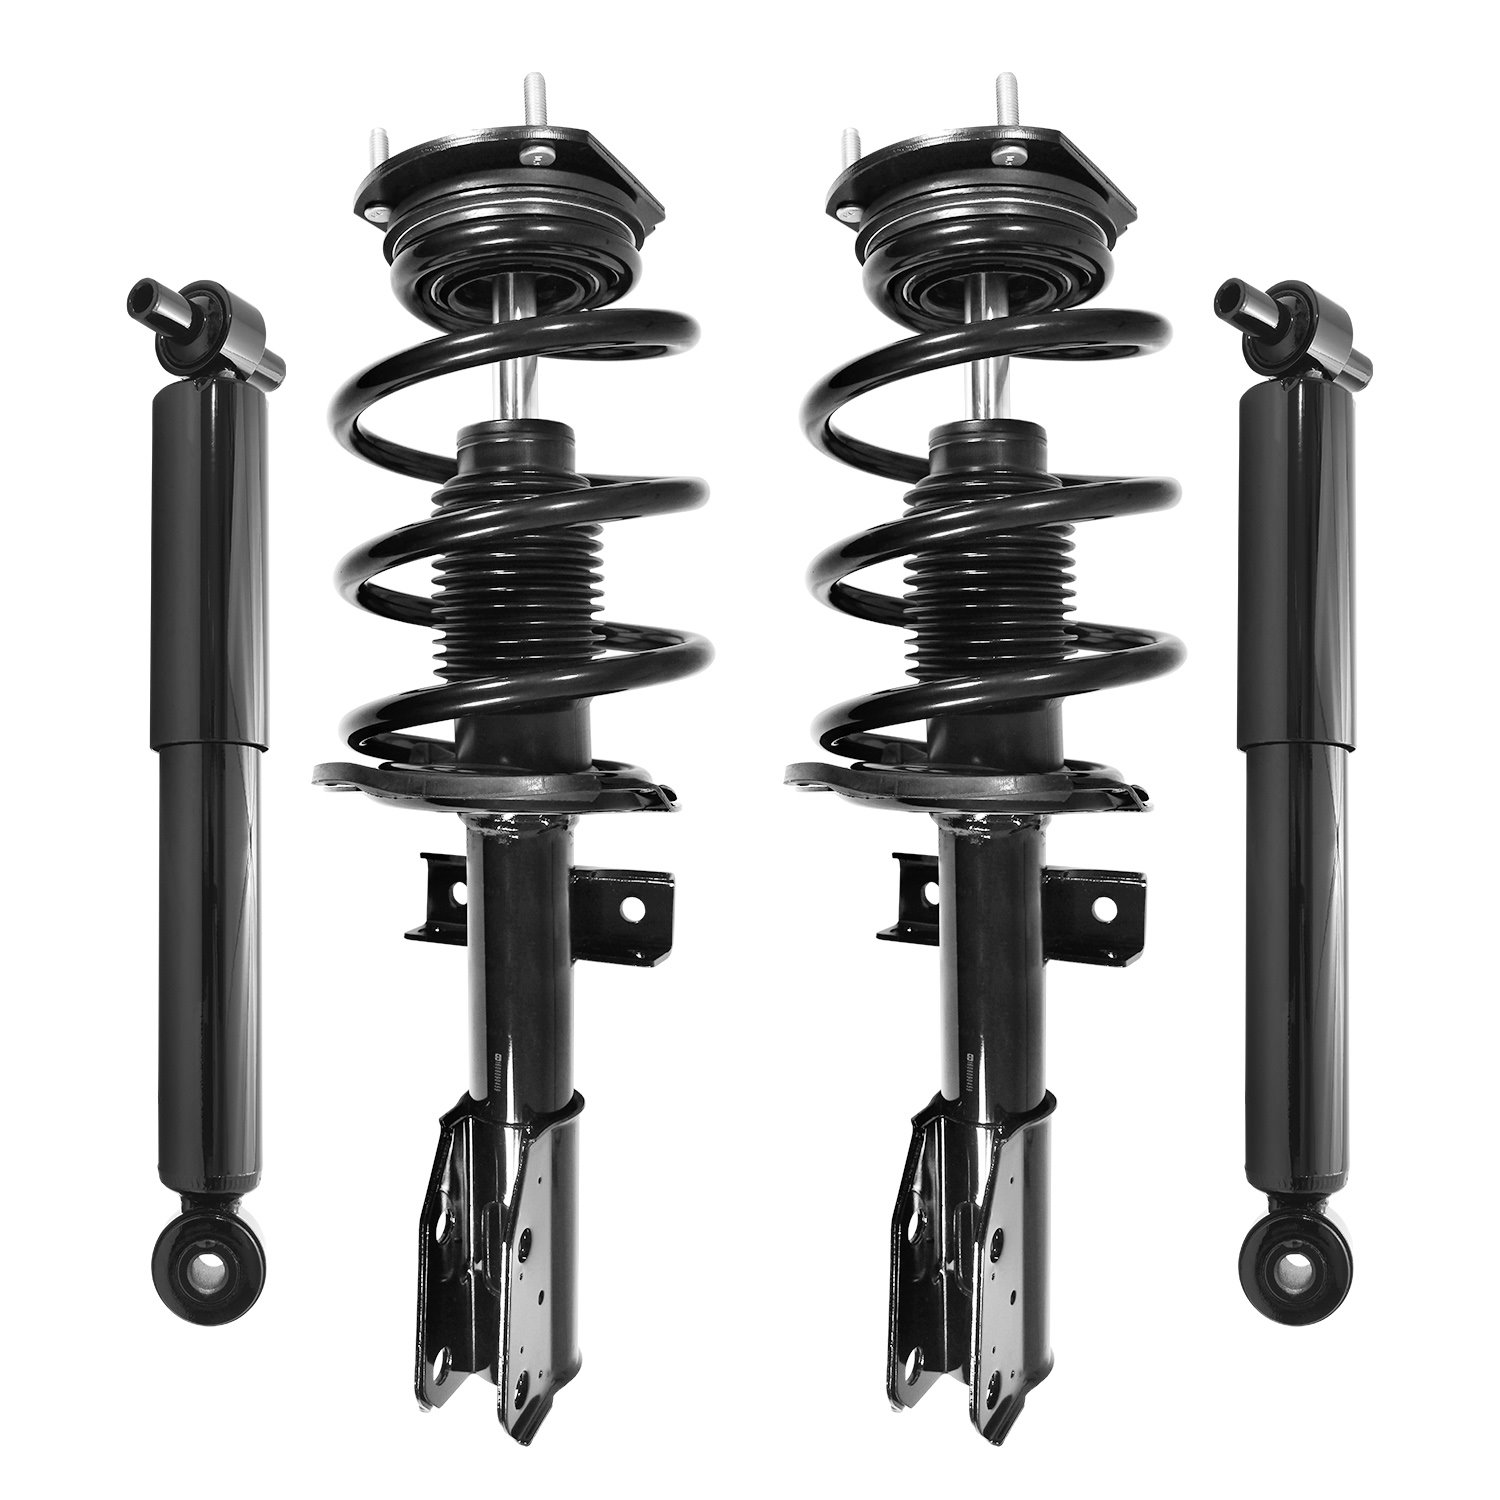 4-11680-213050-001 Front & Rear Suspension Strut & Coil Spring Assembly Fits Select GM